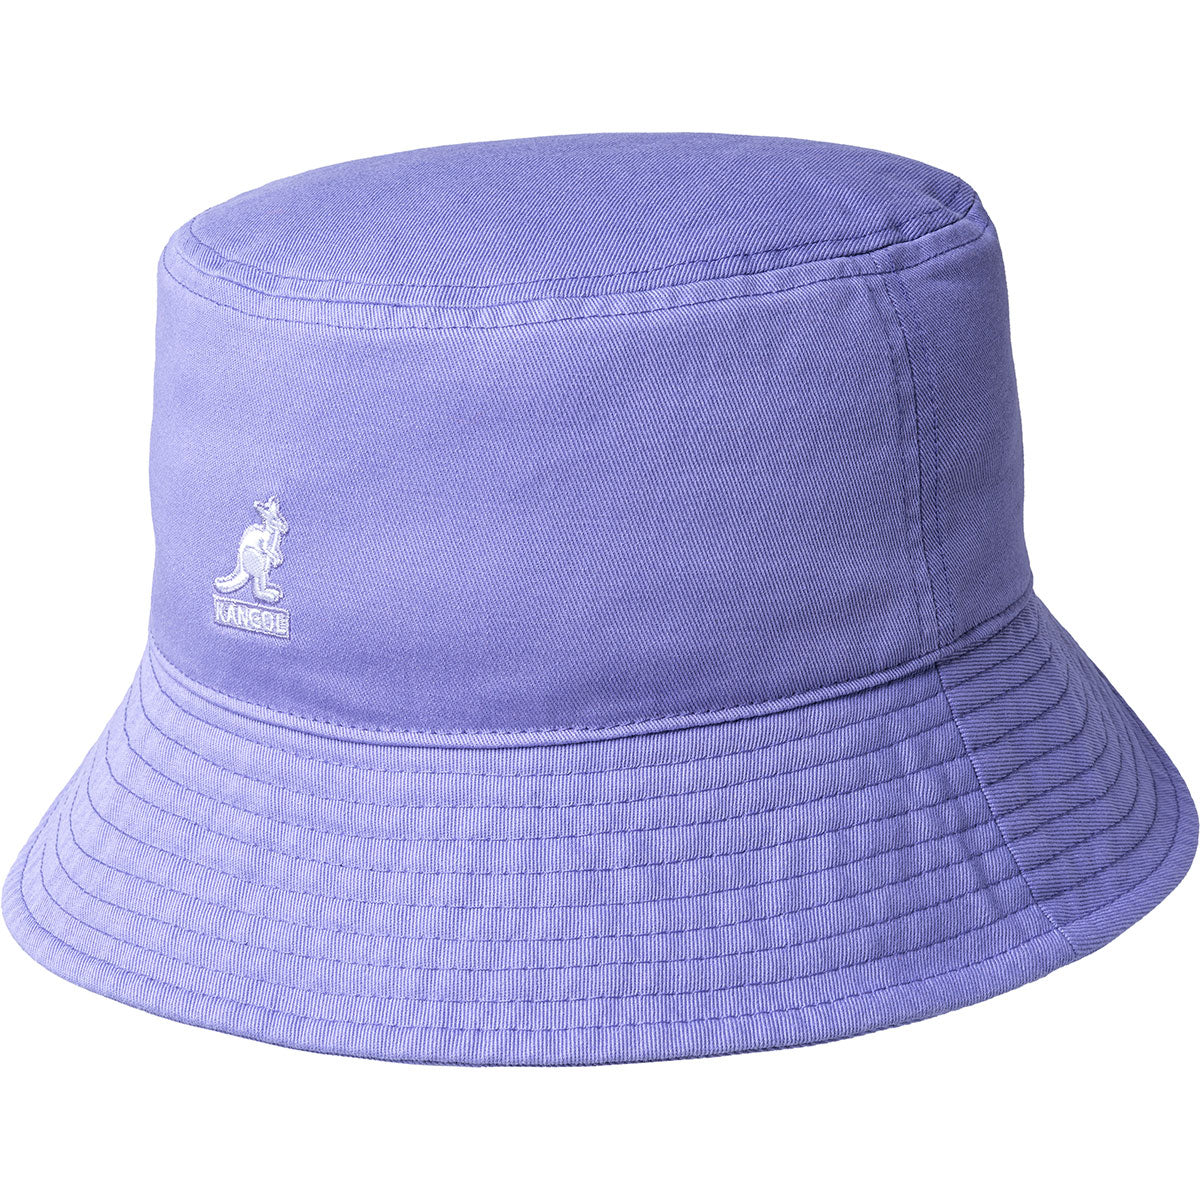 Washed Bucket Hat - Iced Lilac - Headz Up 